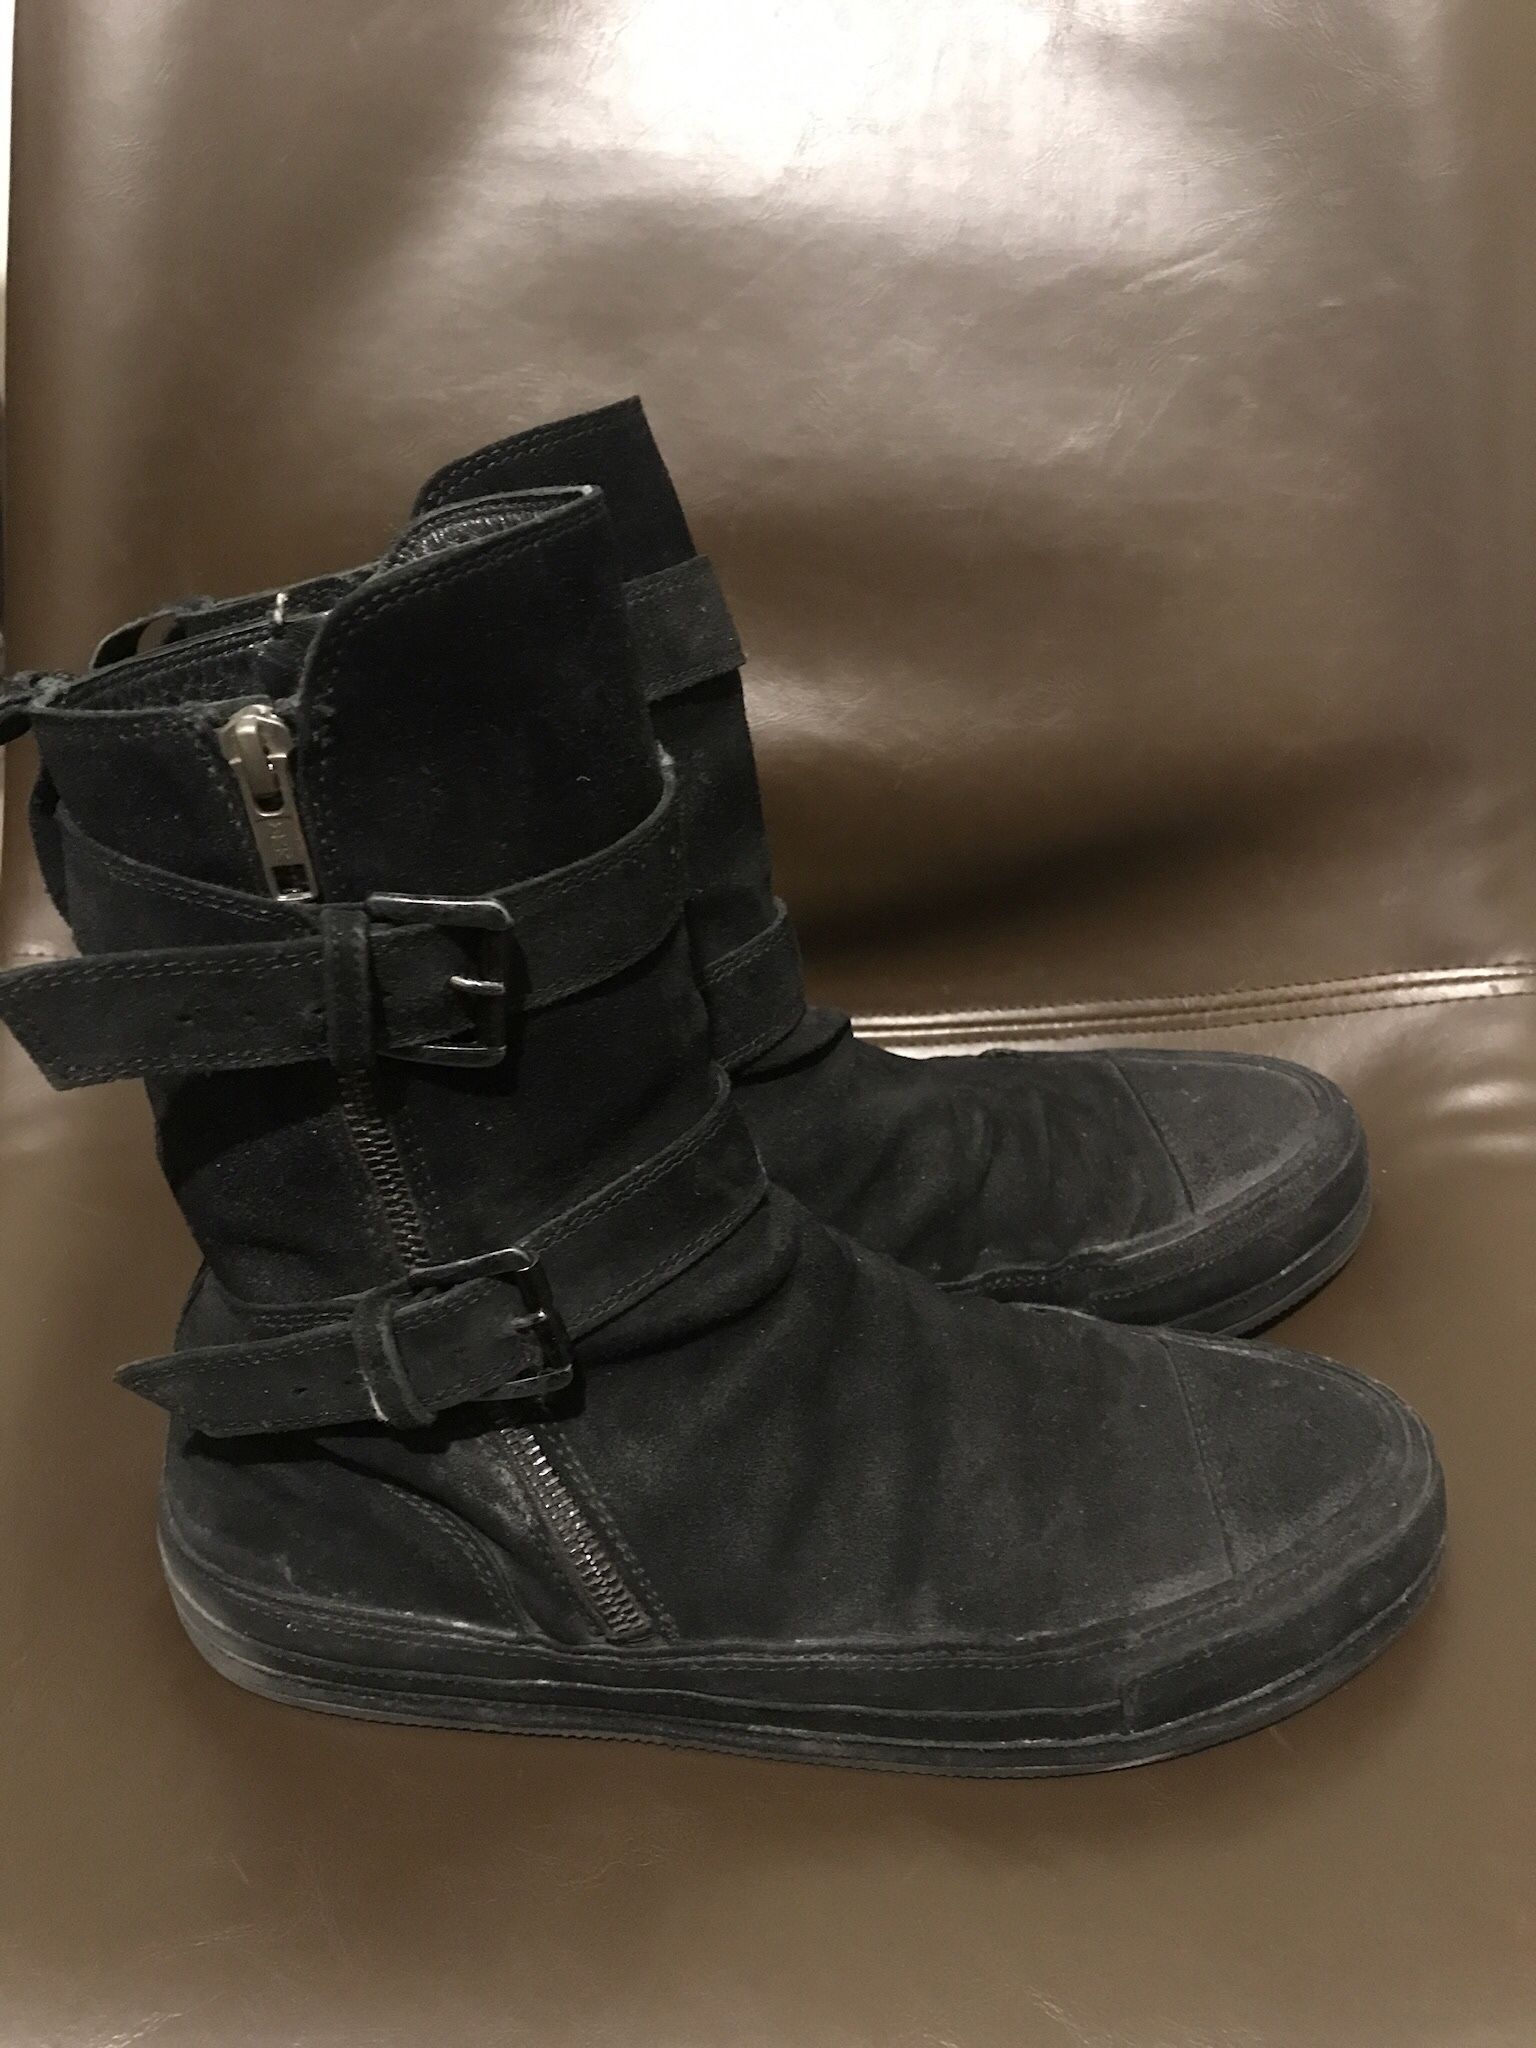 Double Strapped Ann Demeulemeester Boots Size 8.5